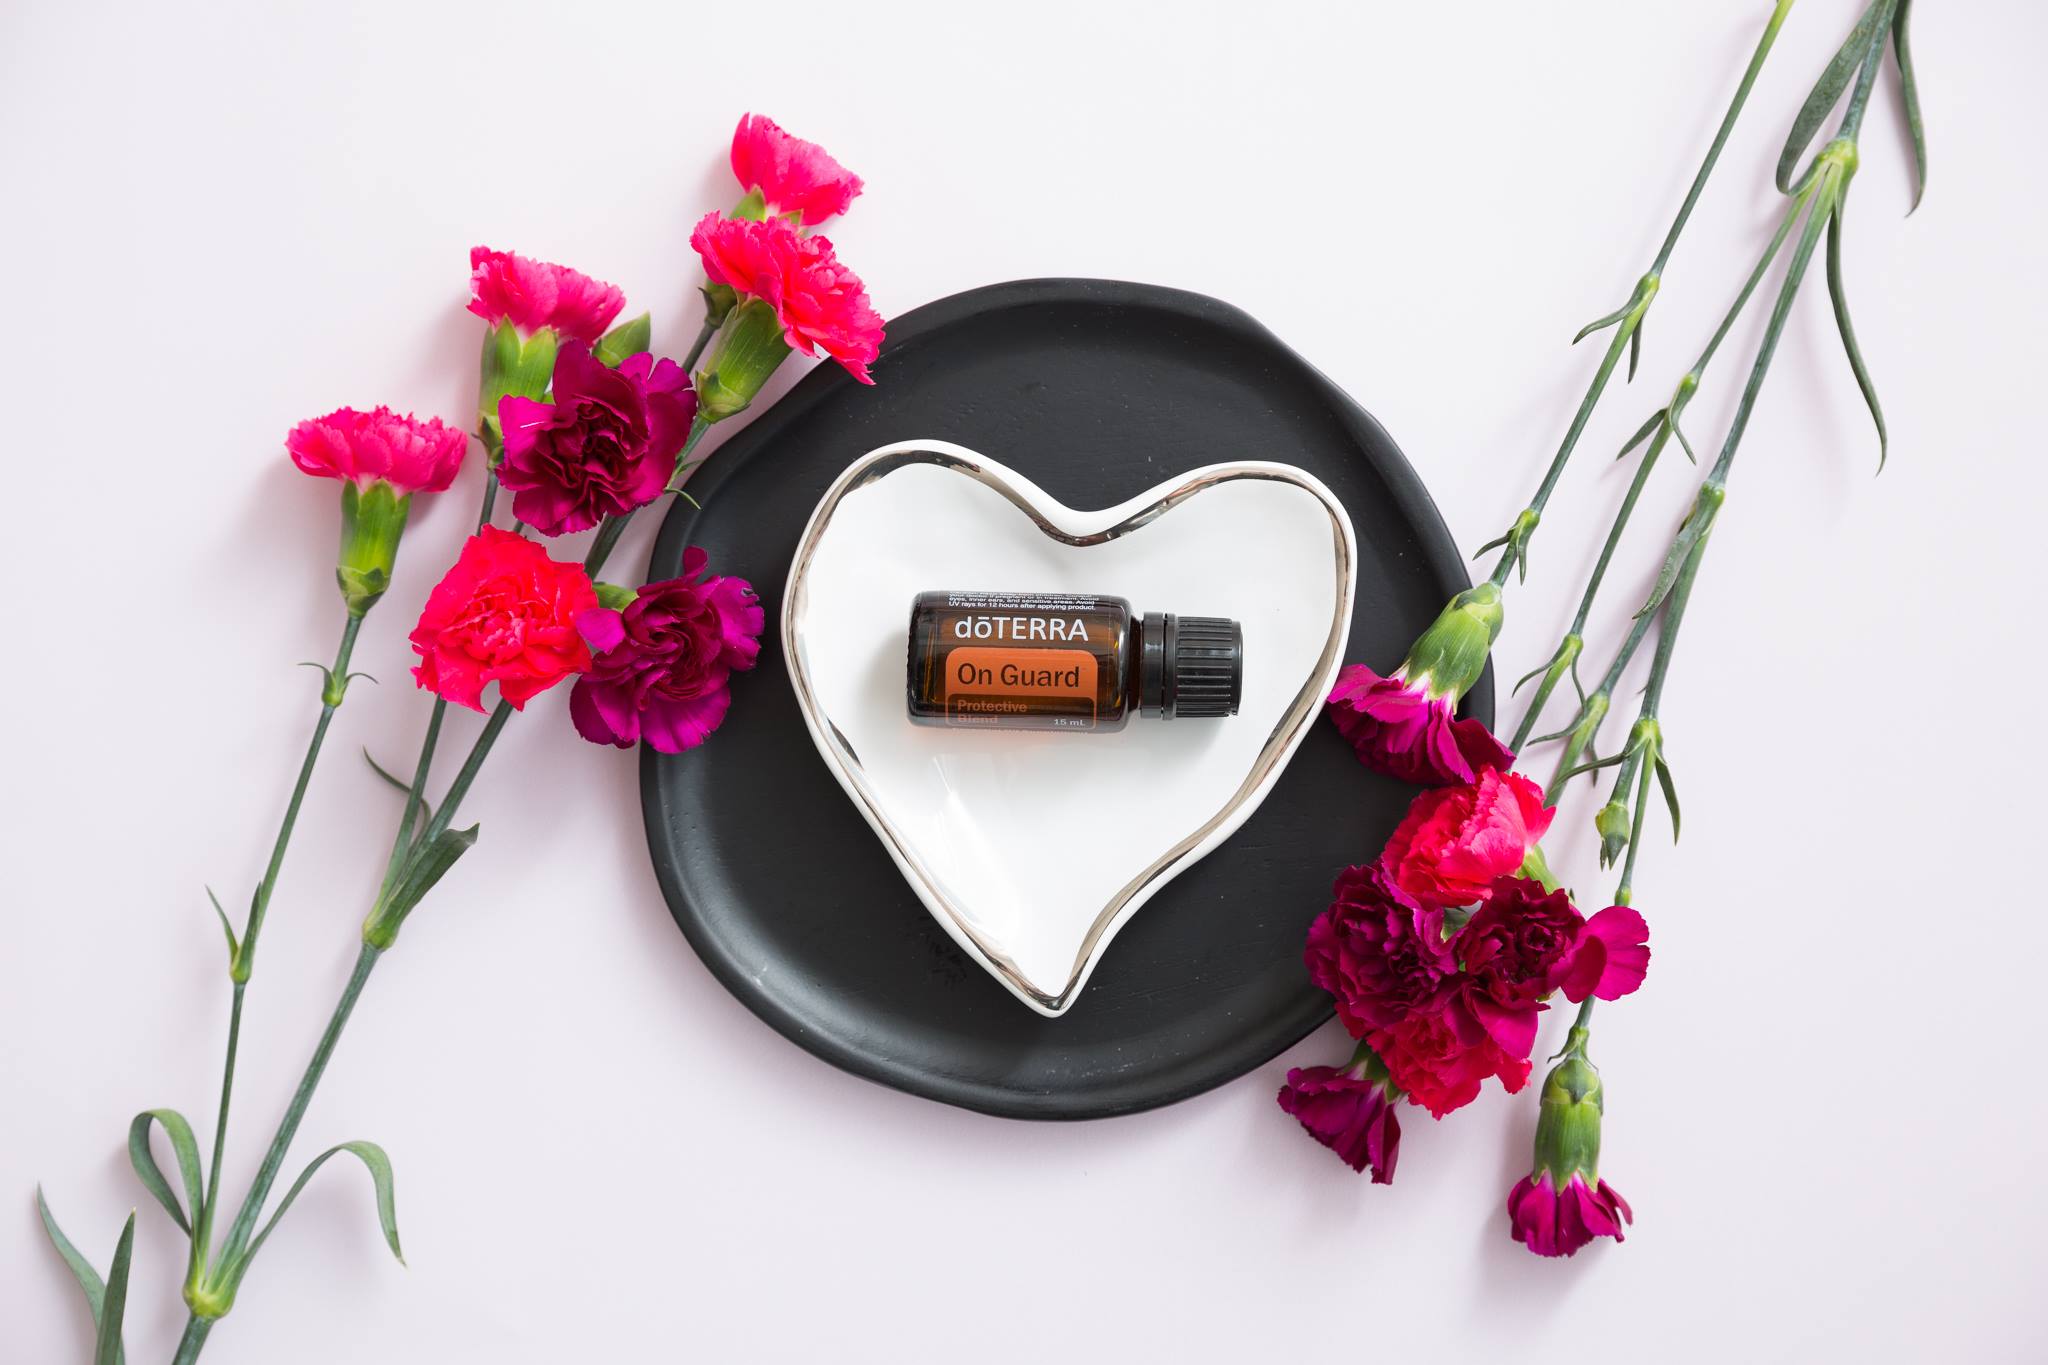 doTERRA On Guard essential oil